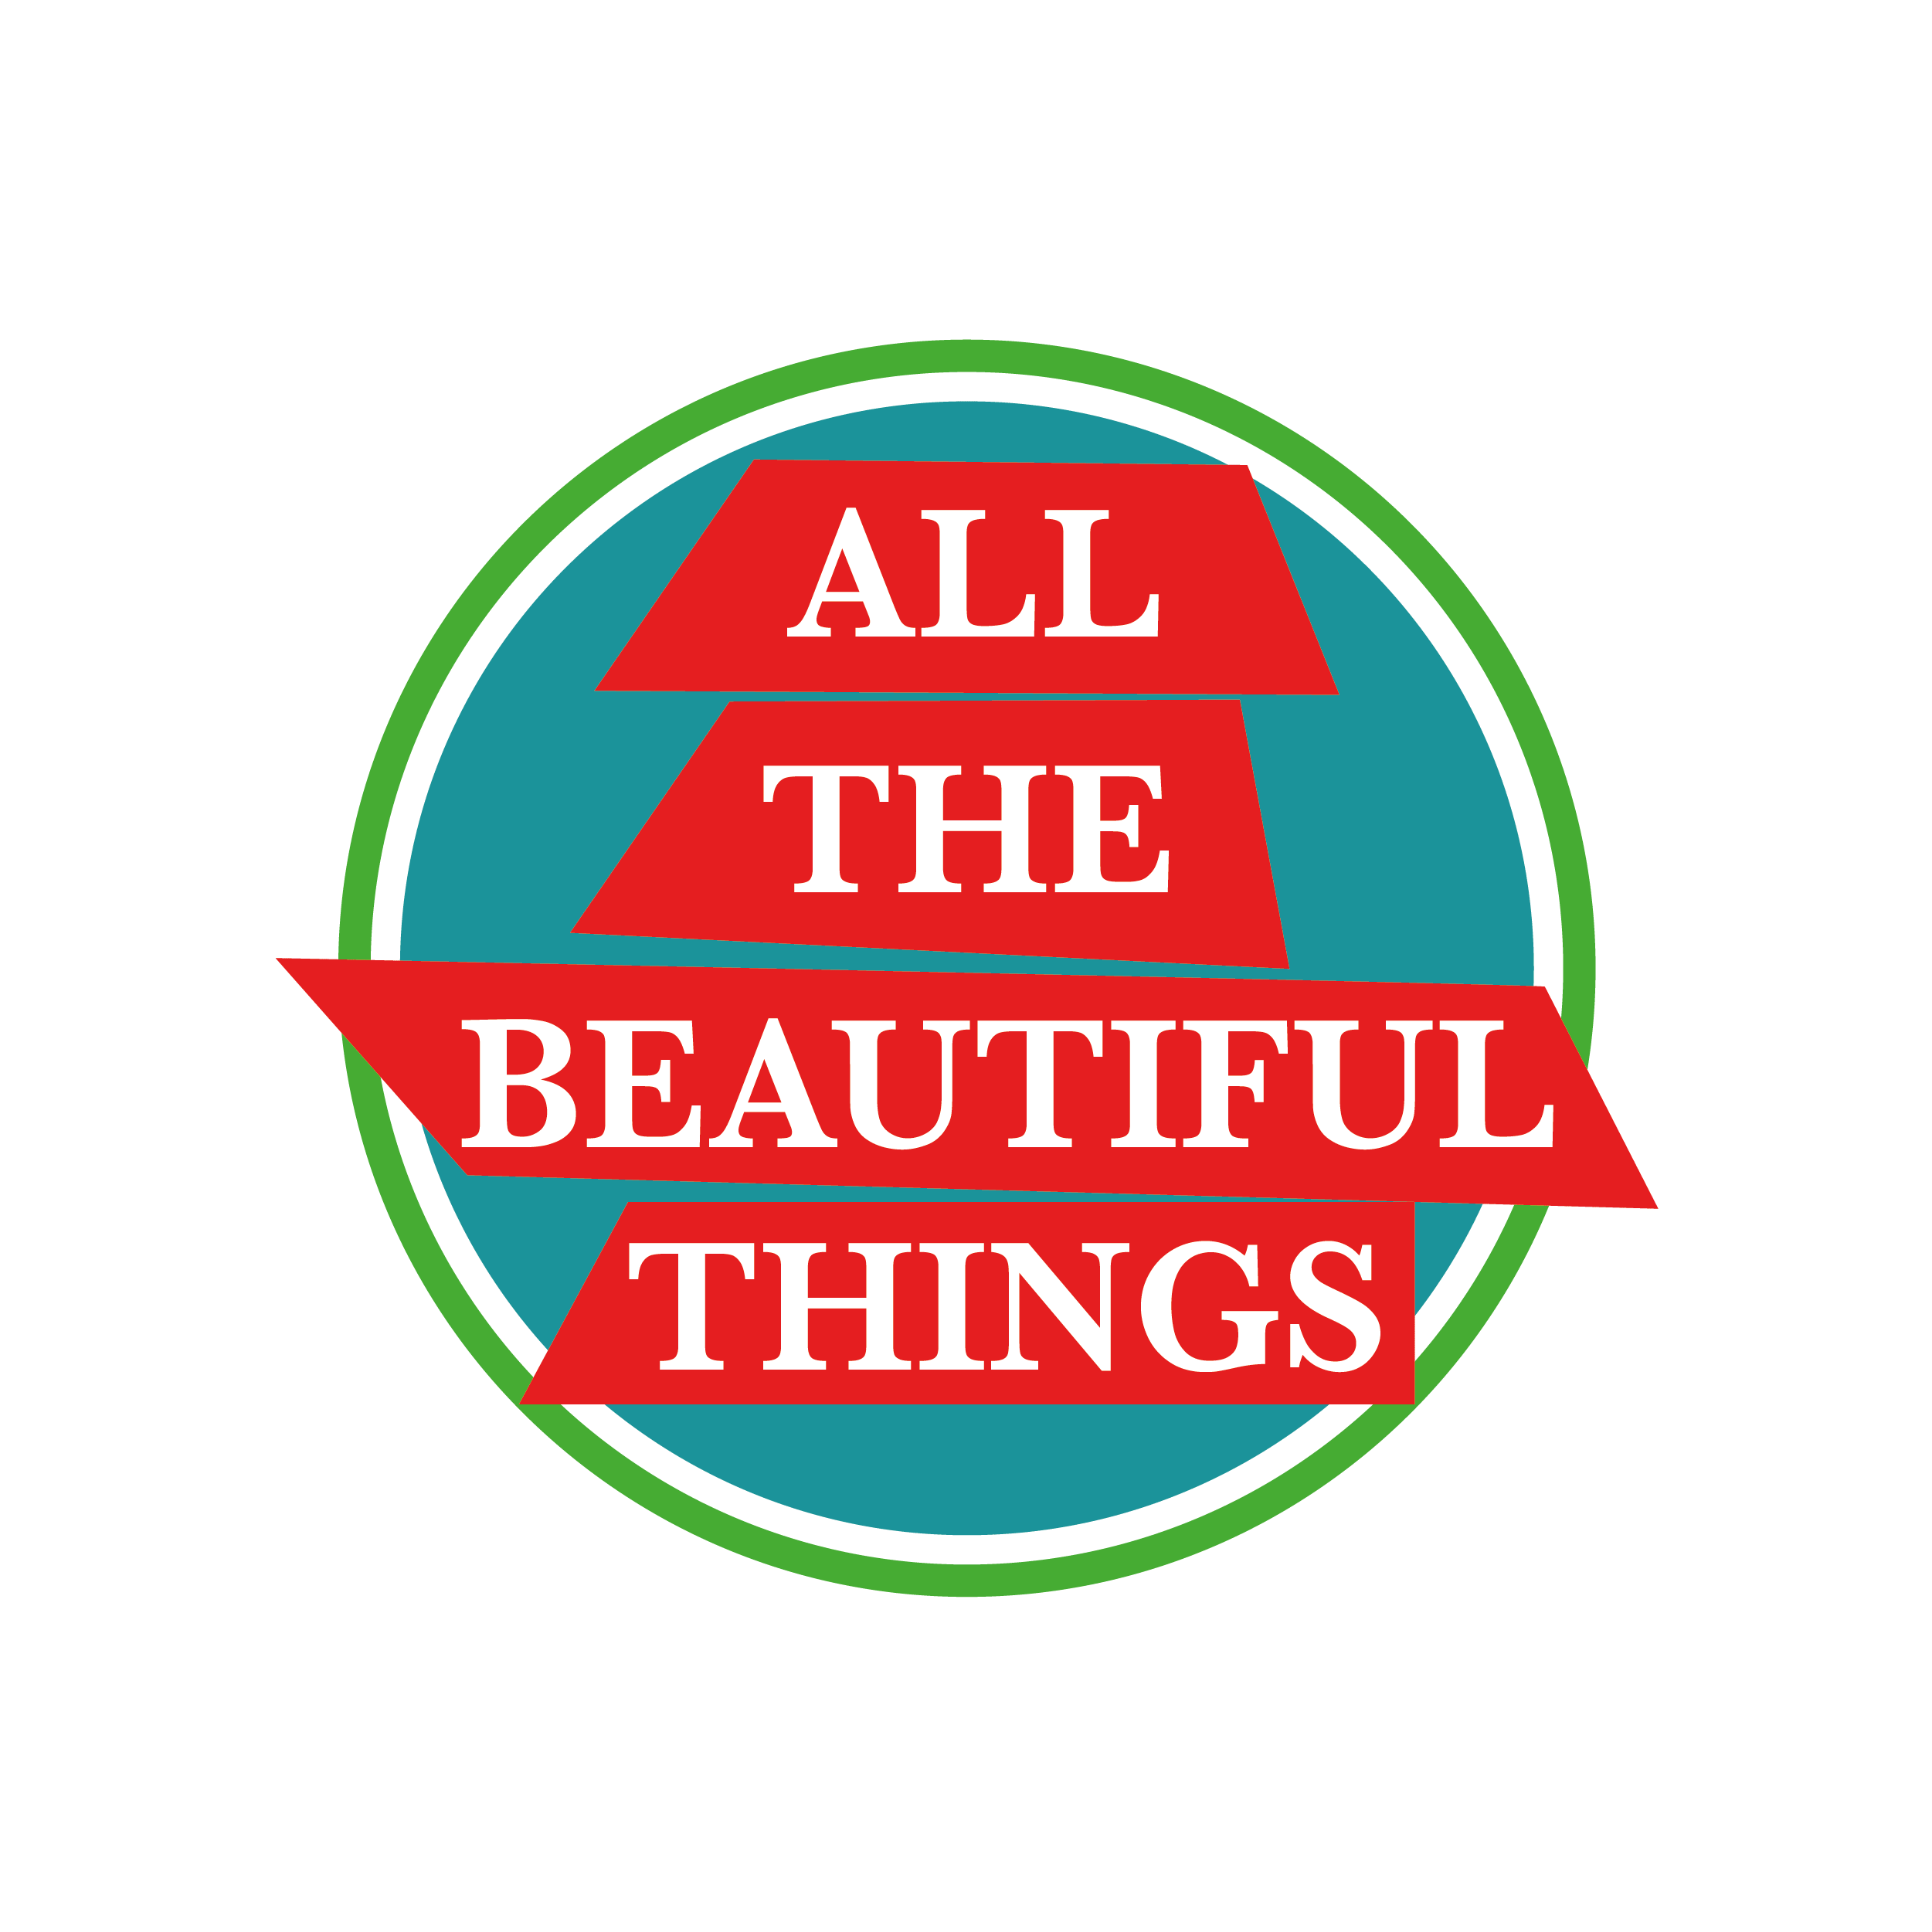 All The Beautiful Things logo